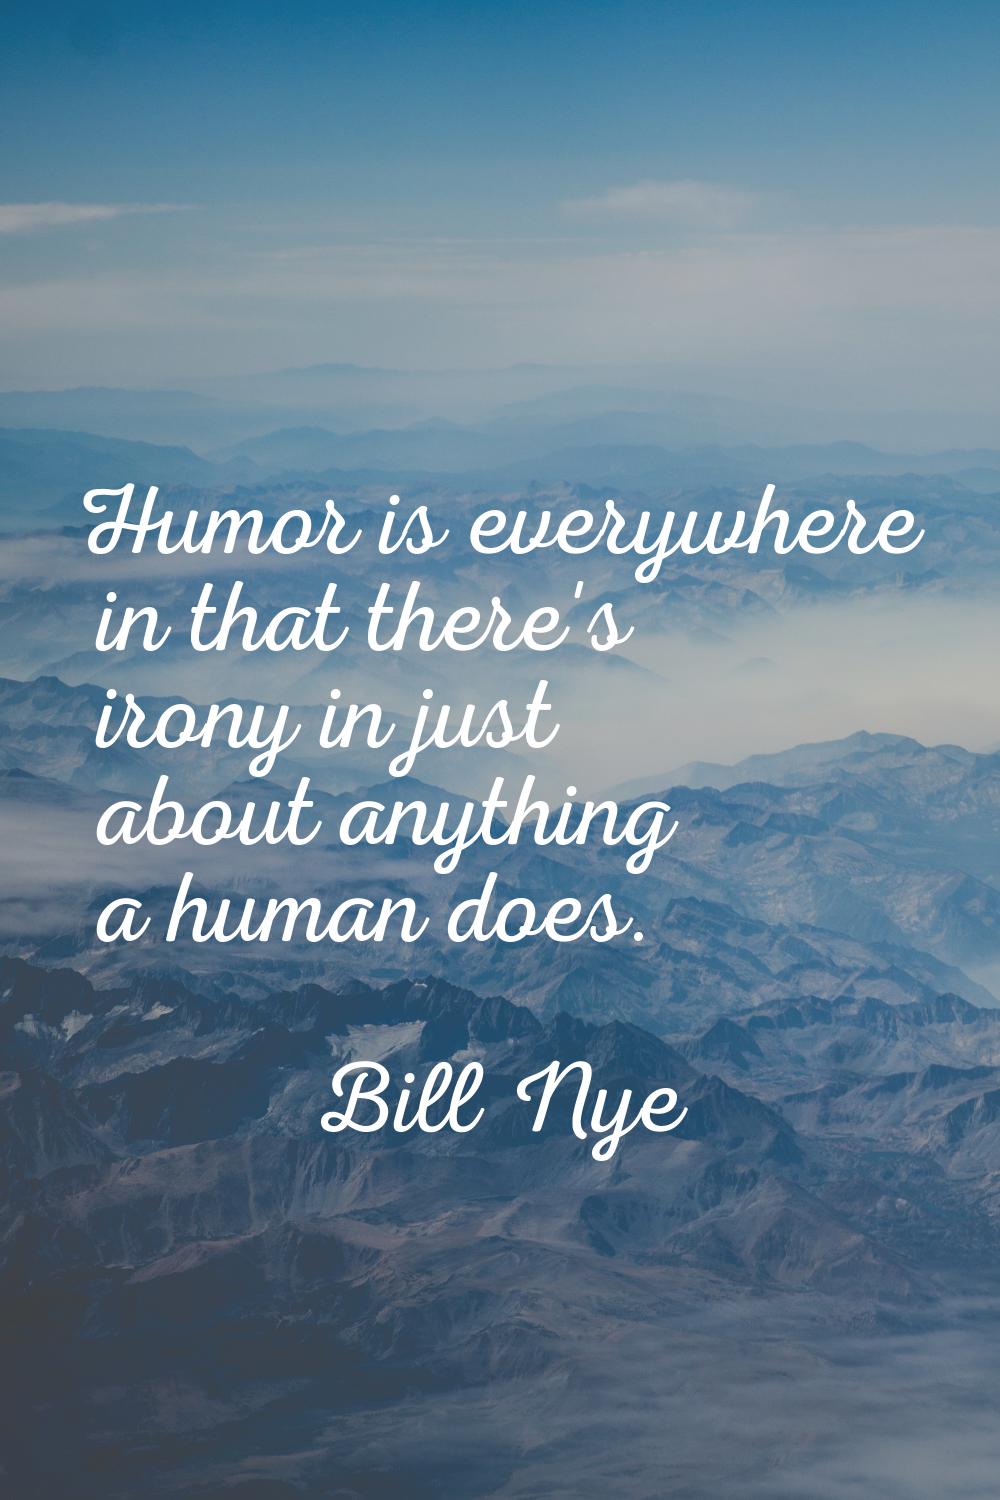 Humor is everywhere in that there's irony in just about anything a human does.